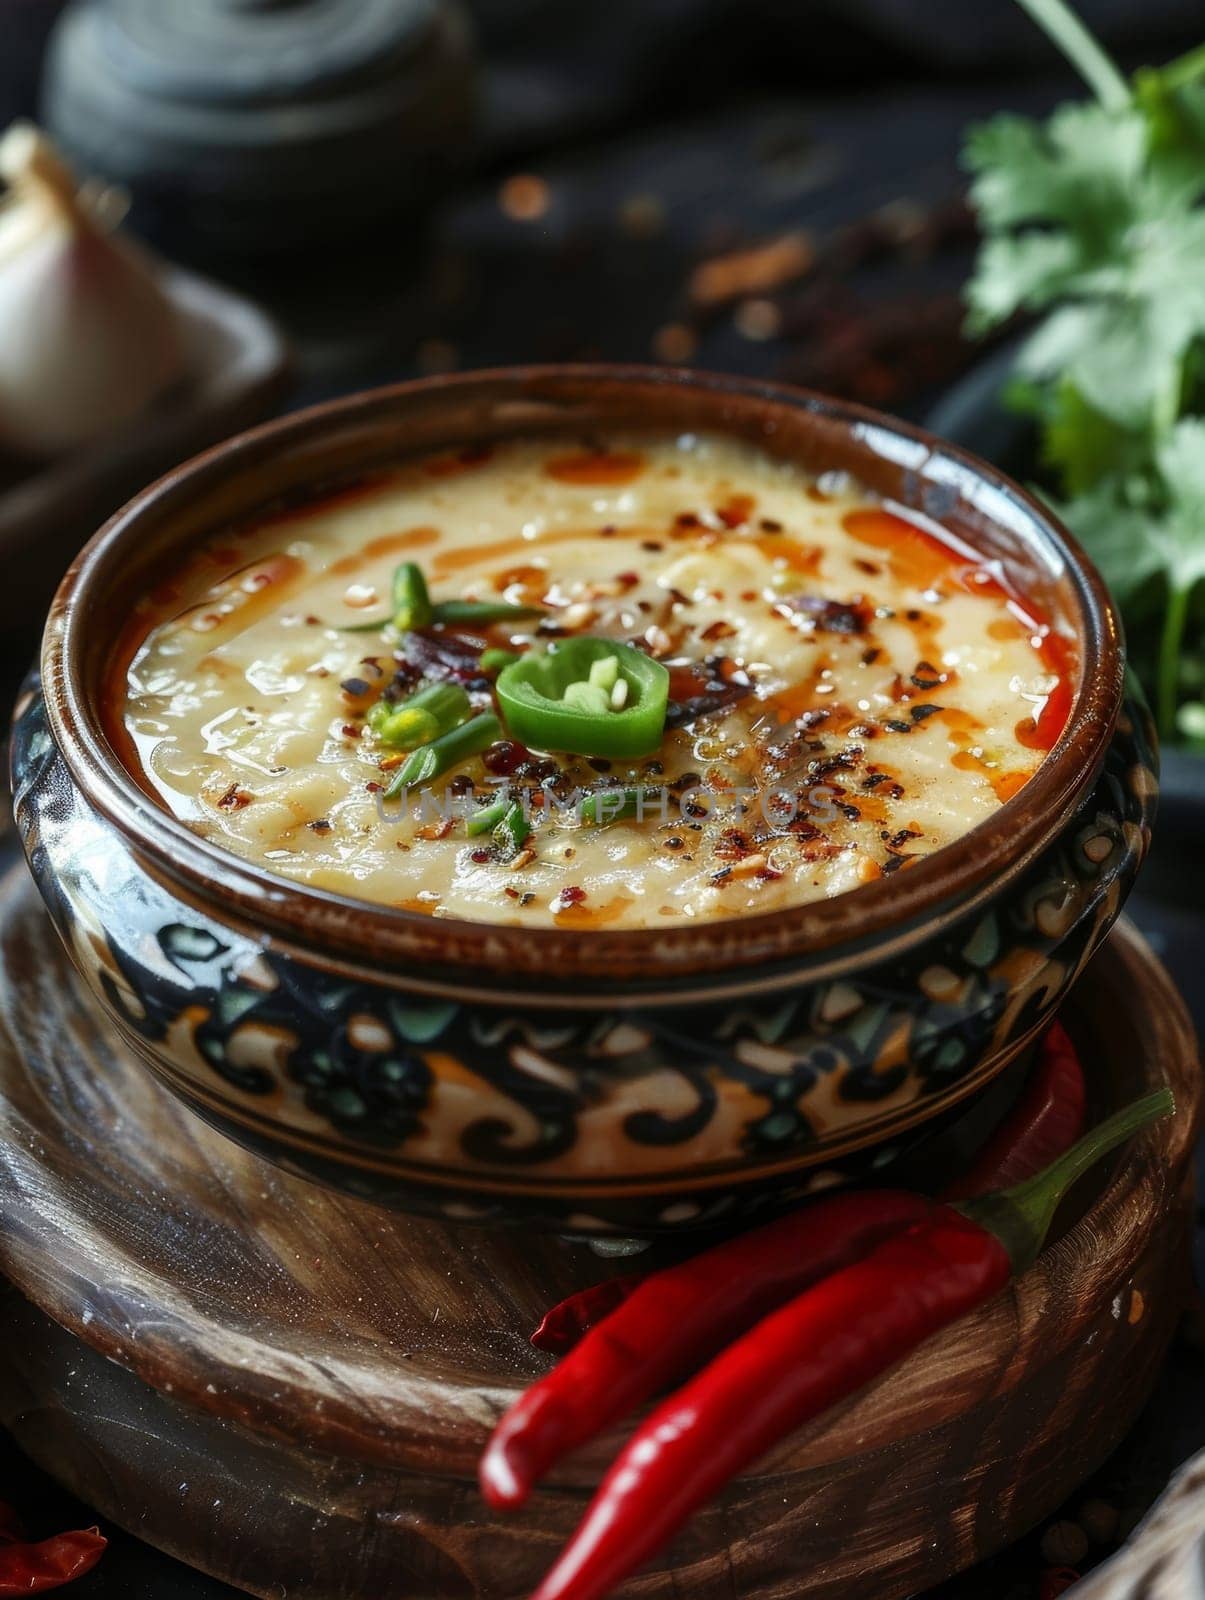 Bhutanese ema datshi in a traditional bowl, with spicy chili peppers and cheese. A traditional and flavorful dish from Bhutan